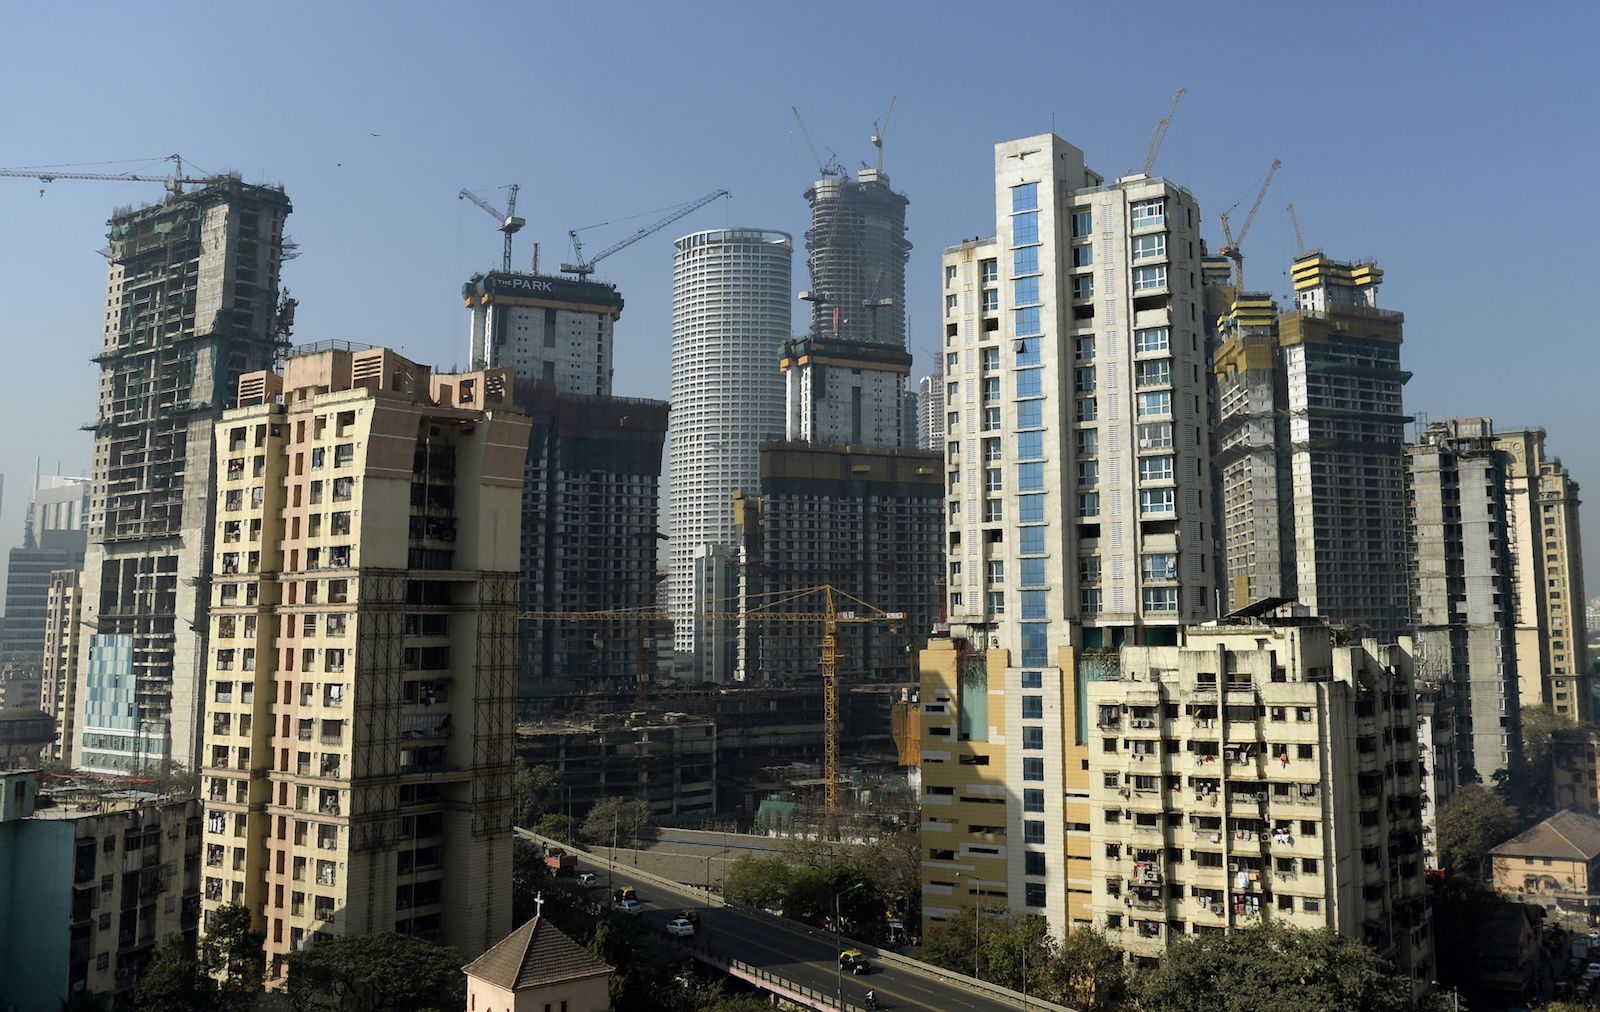 Godrej Properties purchases nearby 15-acre in Bengaluru for the housing project